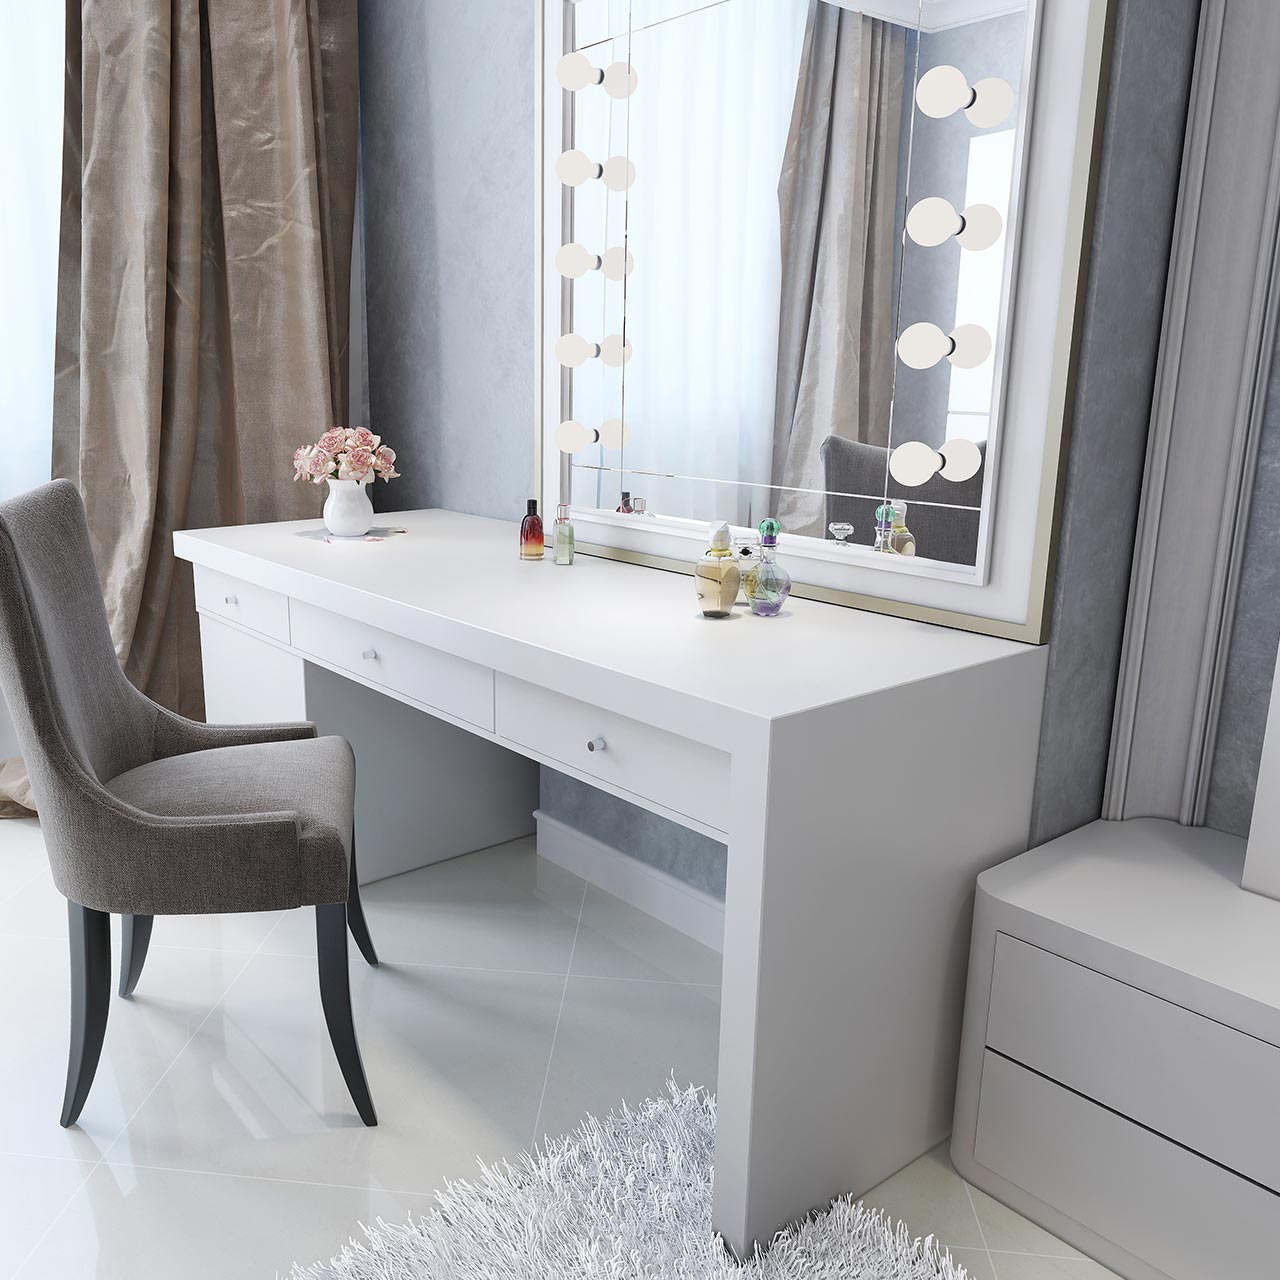 Bedroom interior design furniture with hollywood style white dressing table with lights around the mirror 